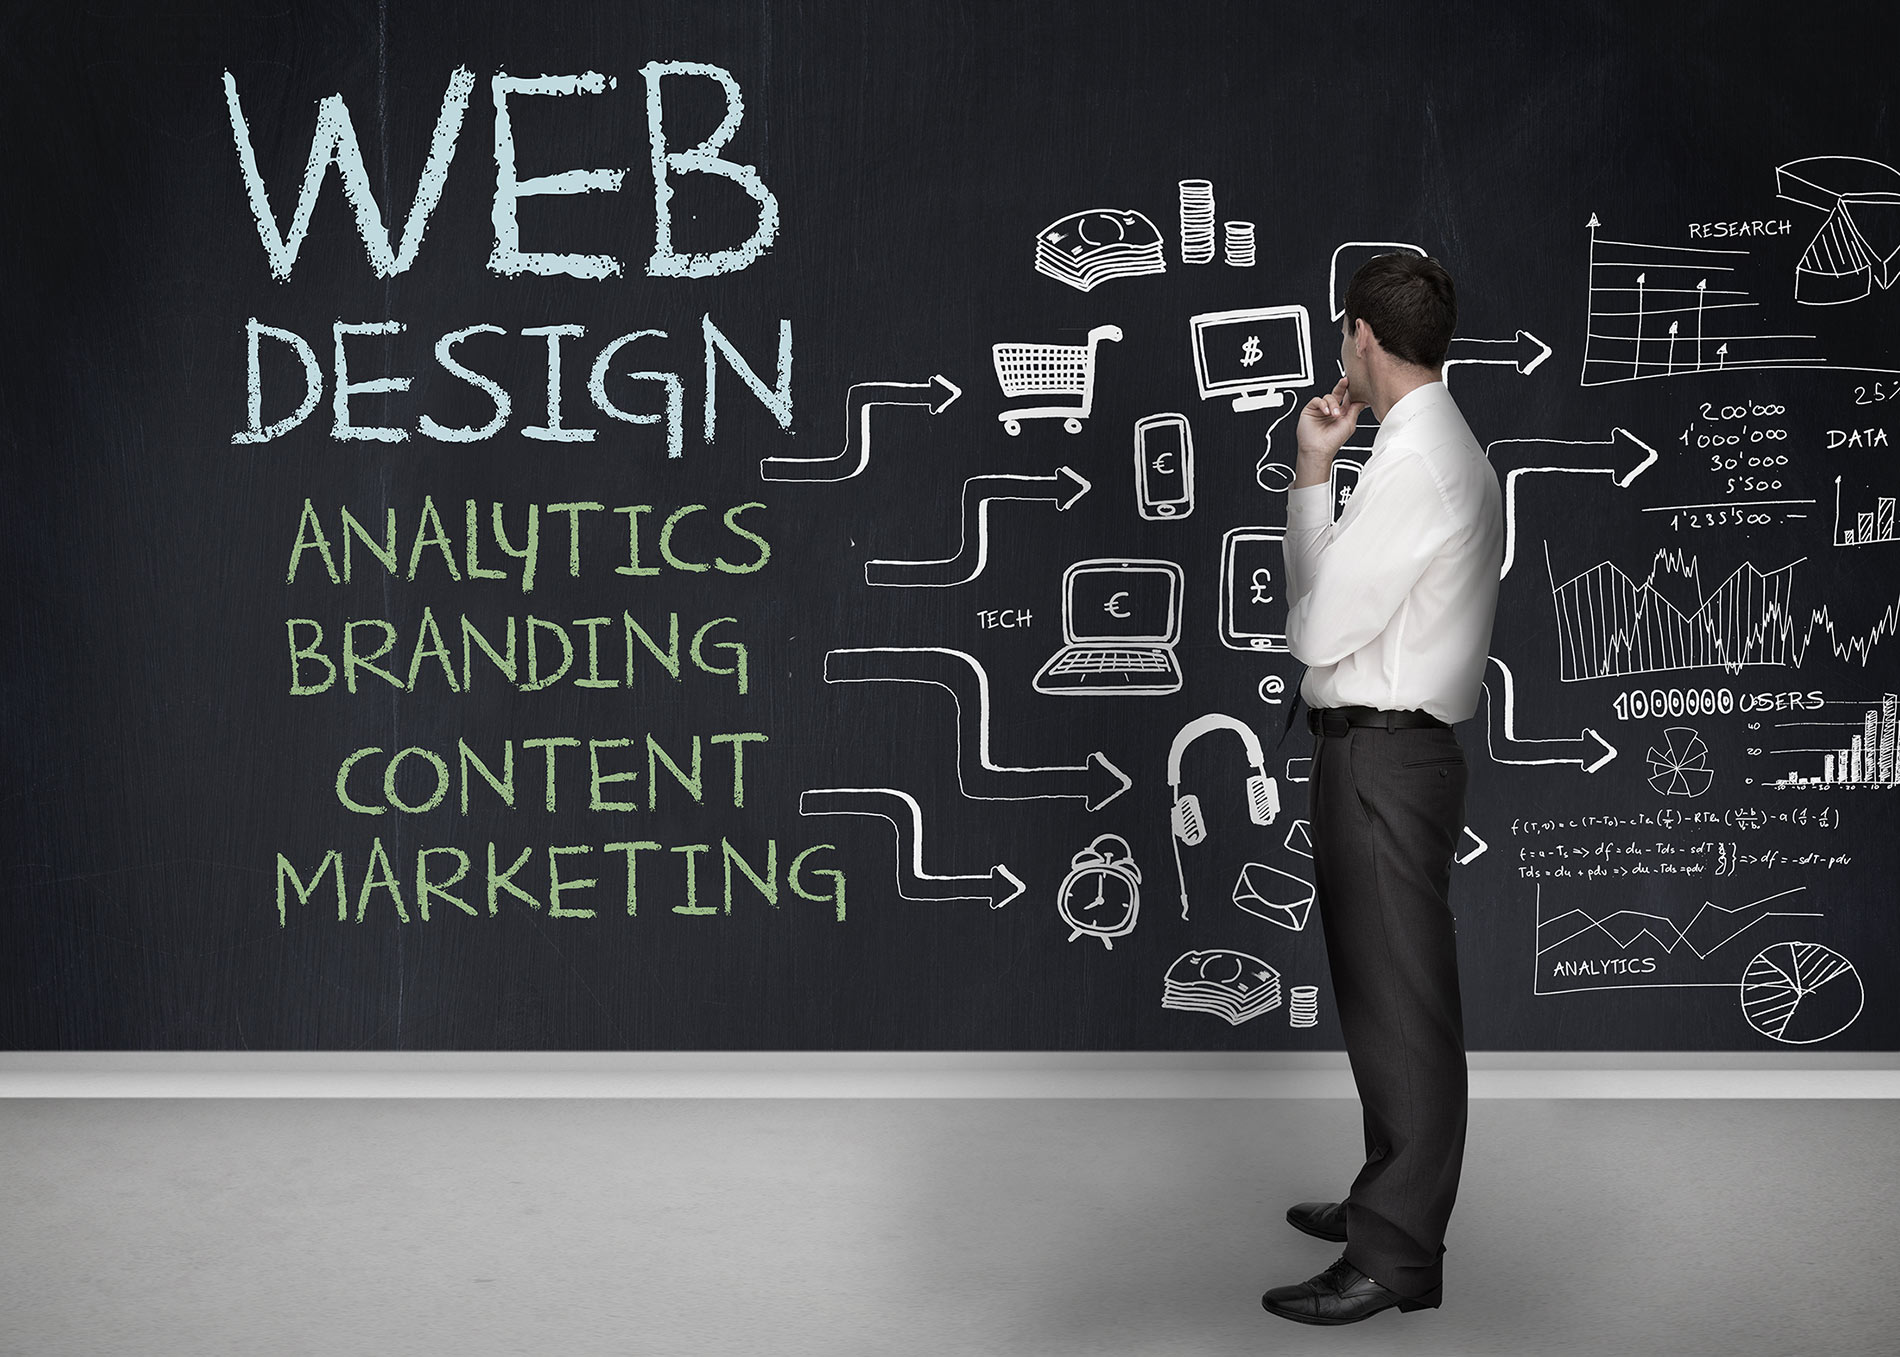 5 Benefits of Hiring a Website Design Company for Your Business